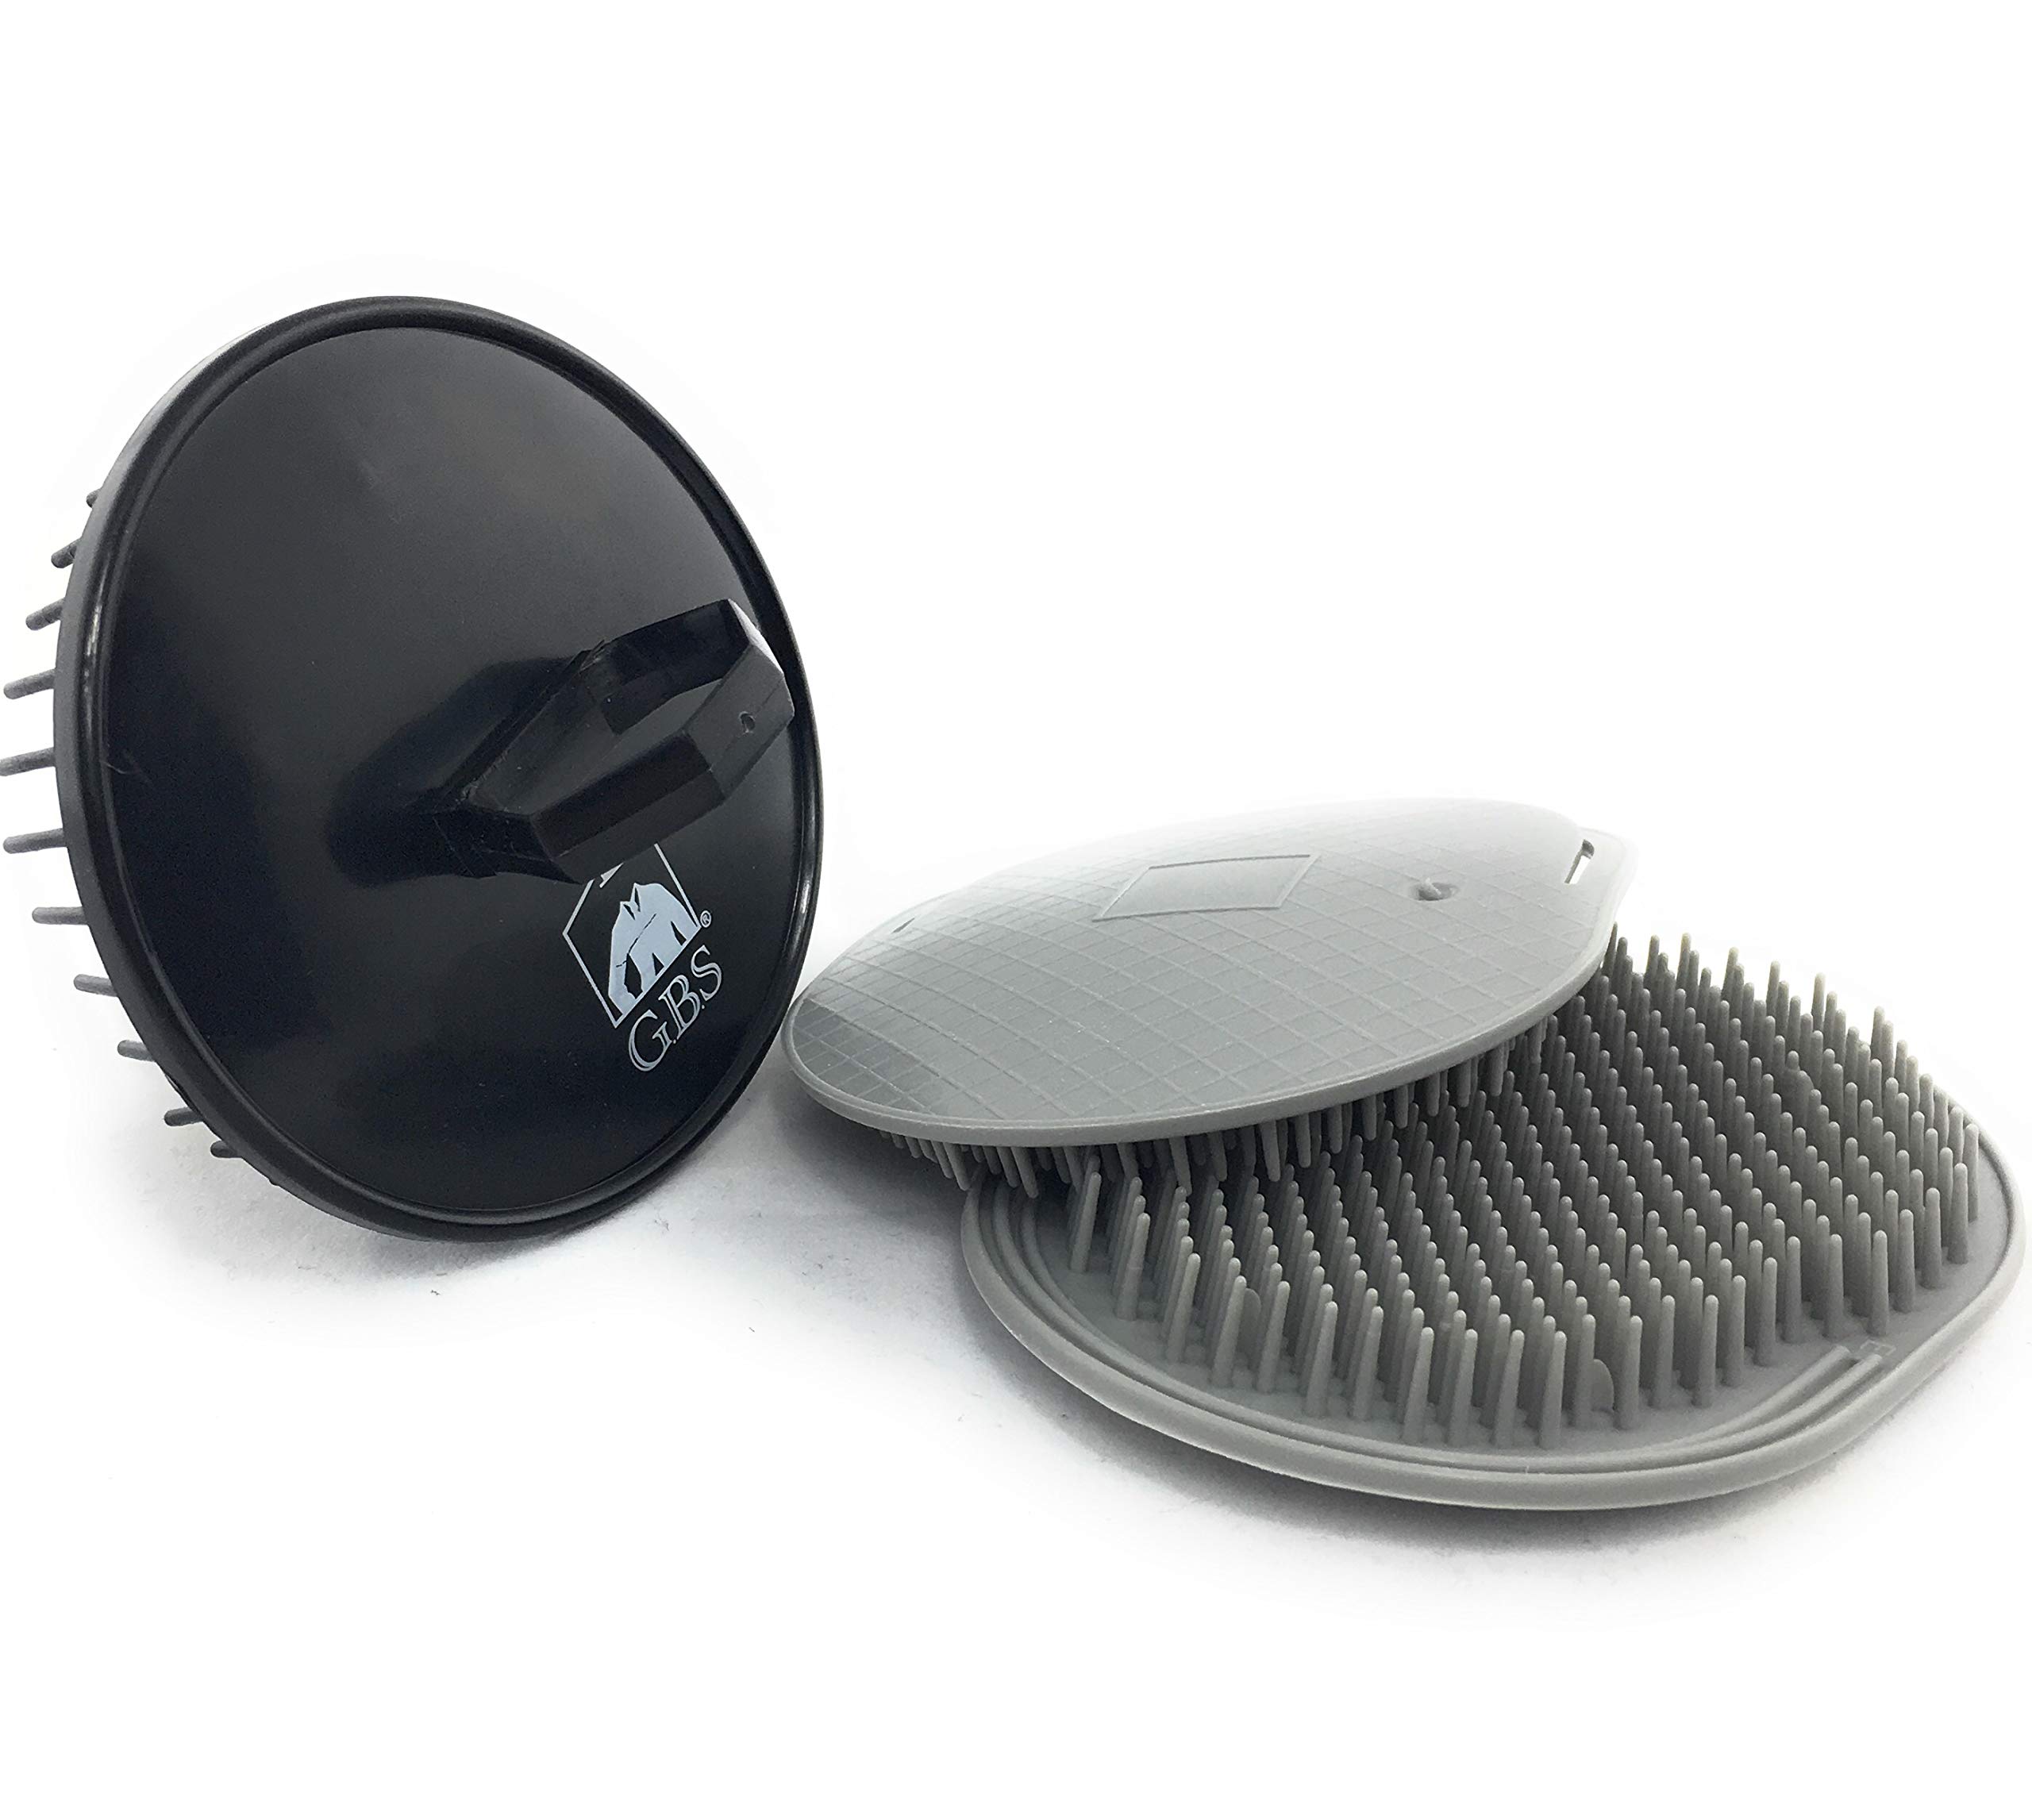 GBS Head Shampoo Brush. Hair Growth Massager Anti Dandruff Brush Hair Scalp Massager Scalp Care Brush Soft Palm Scrubber Comb Pocket Shower for Curly and Dry Hairs. Travel Pack 3 (1 Black, 2 Grey)